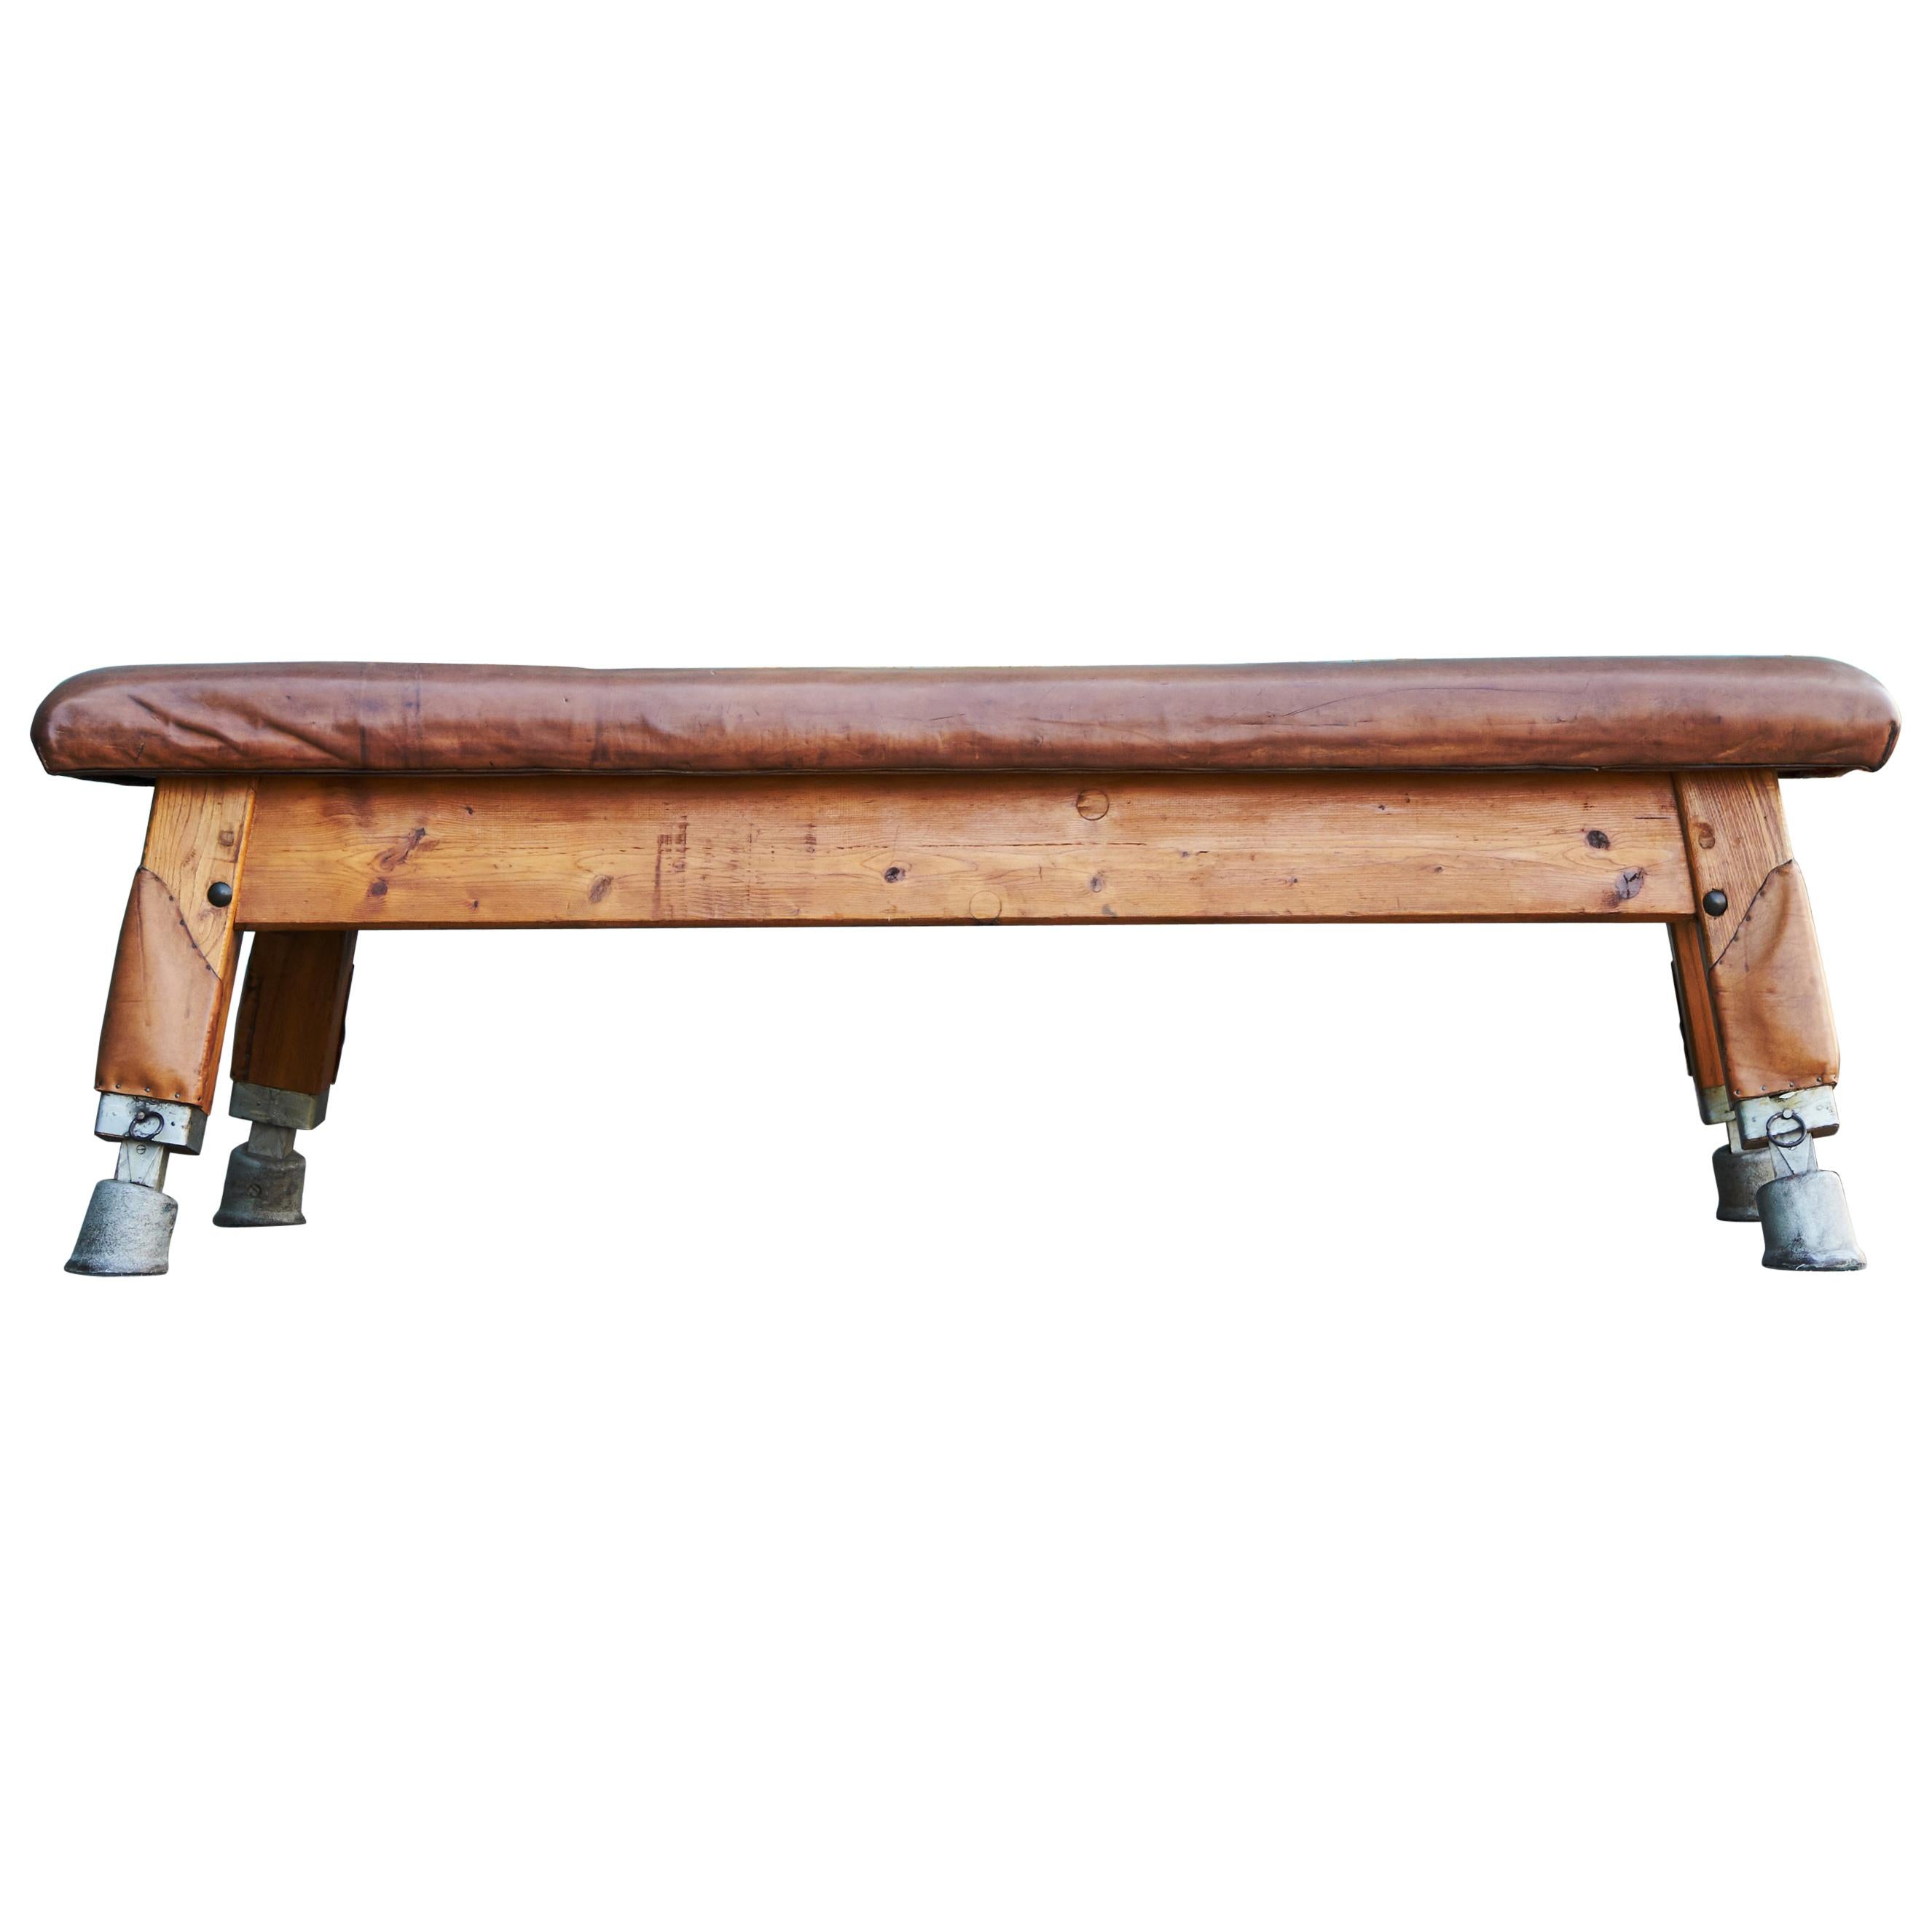 Large Gymnastics Leather Bench Table 1930s, Exclusive